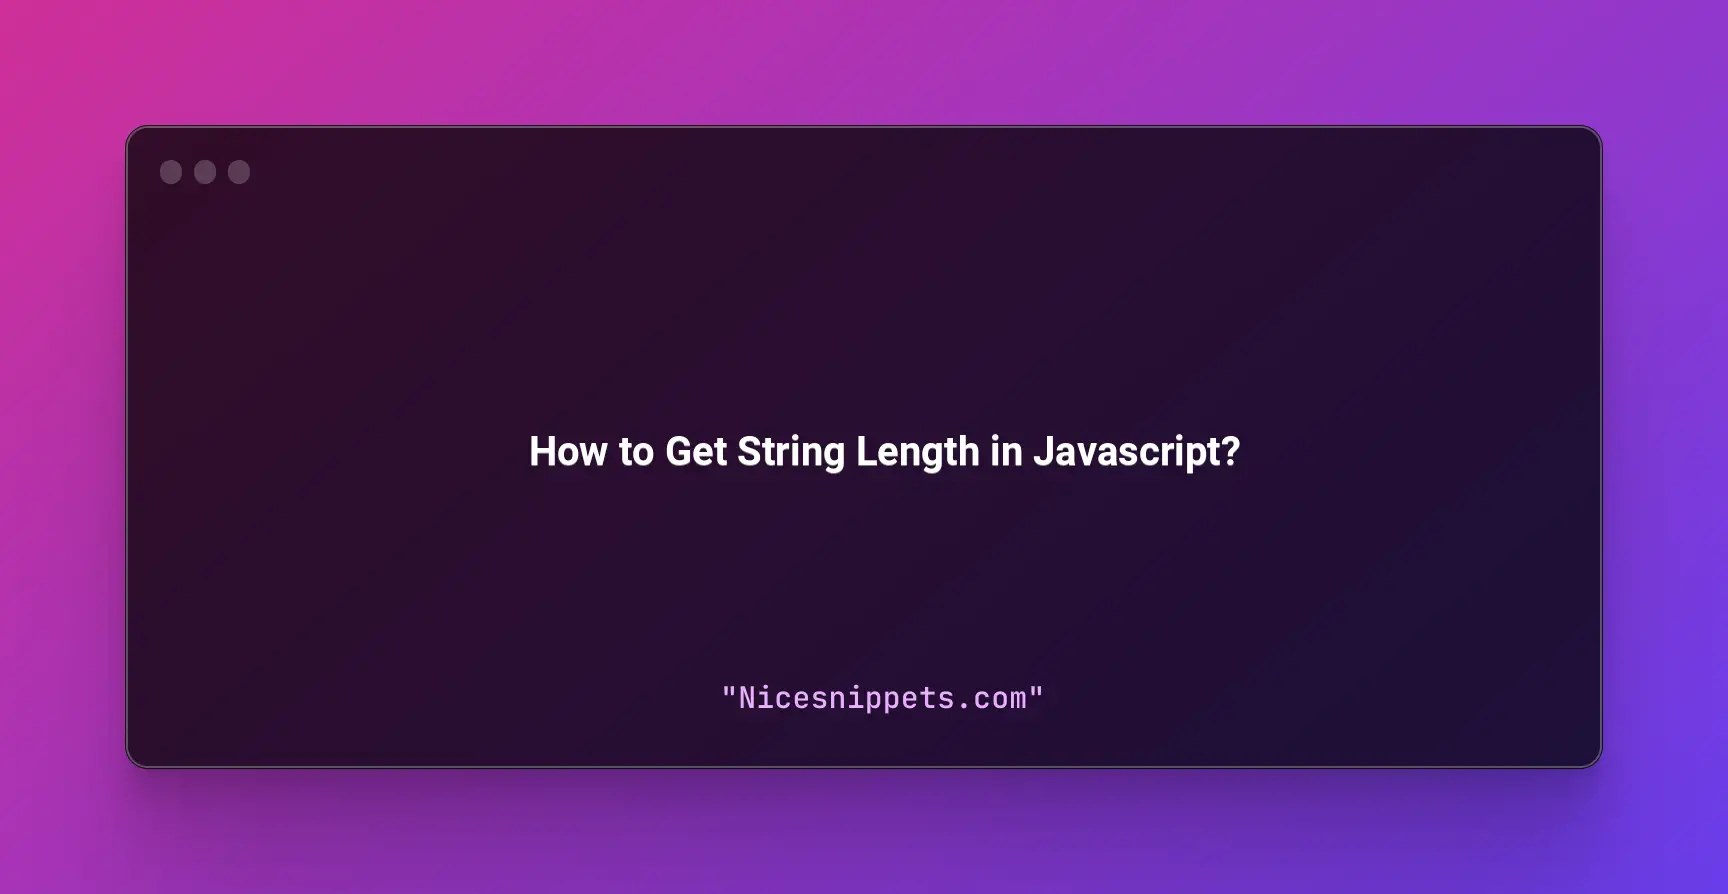 How to Get String Length in Javascript?